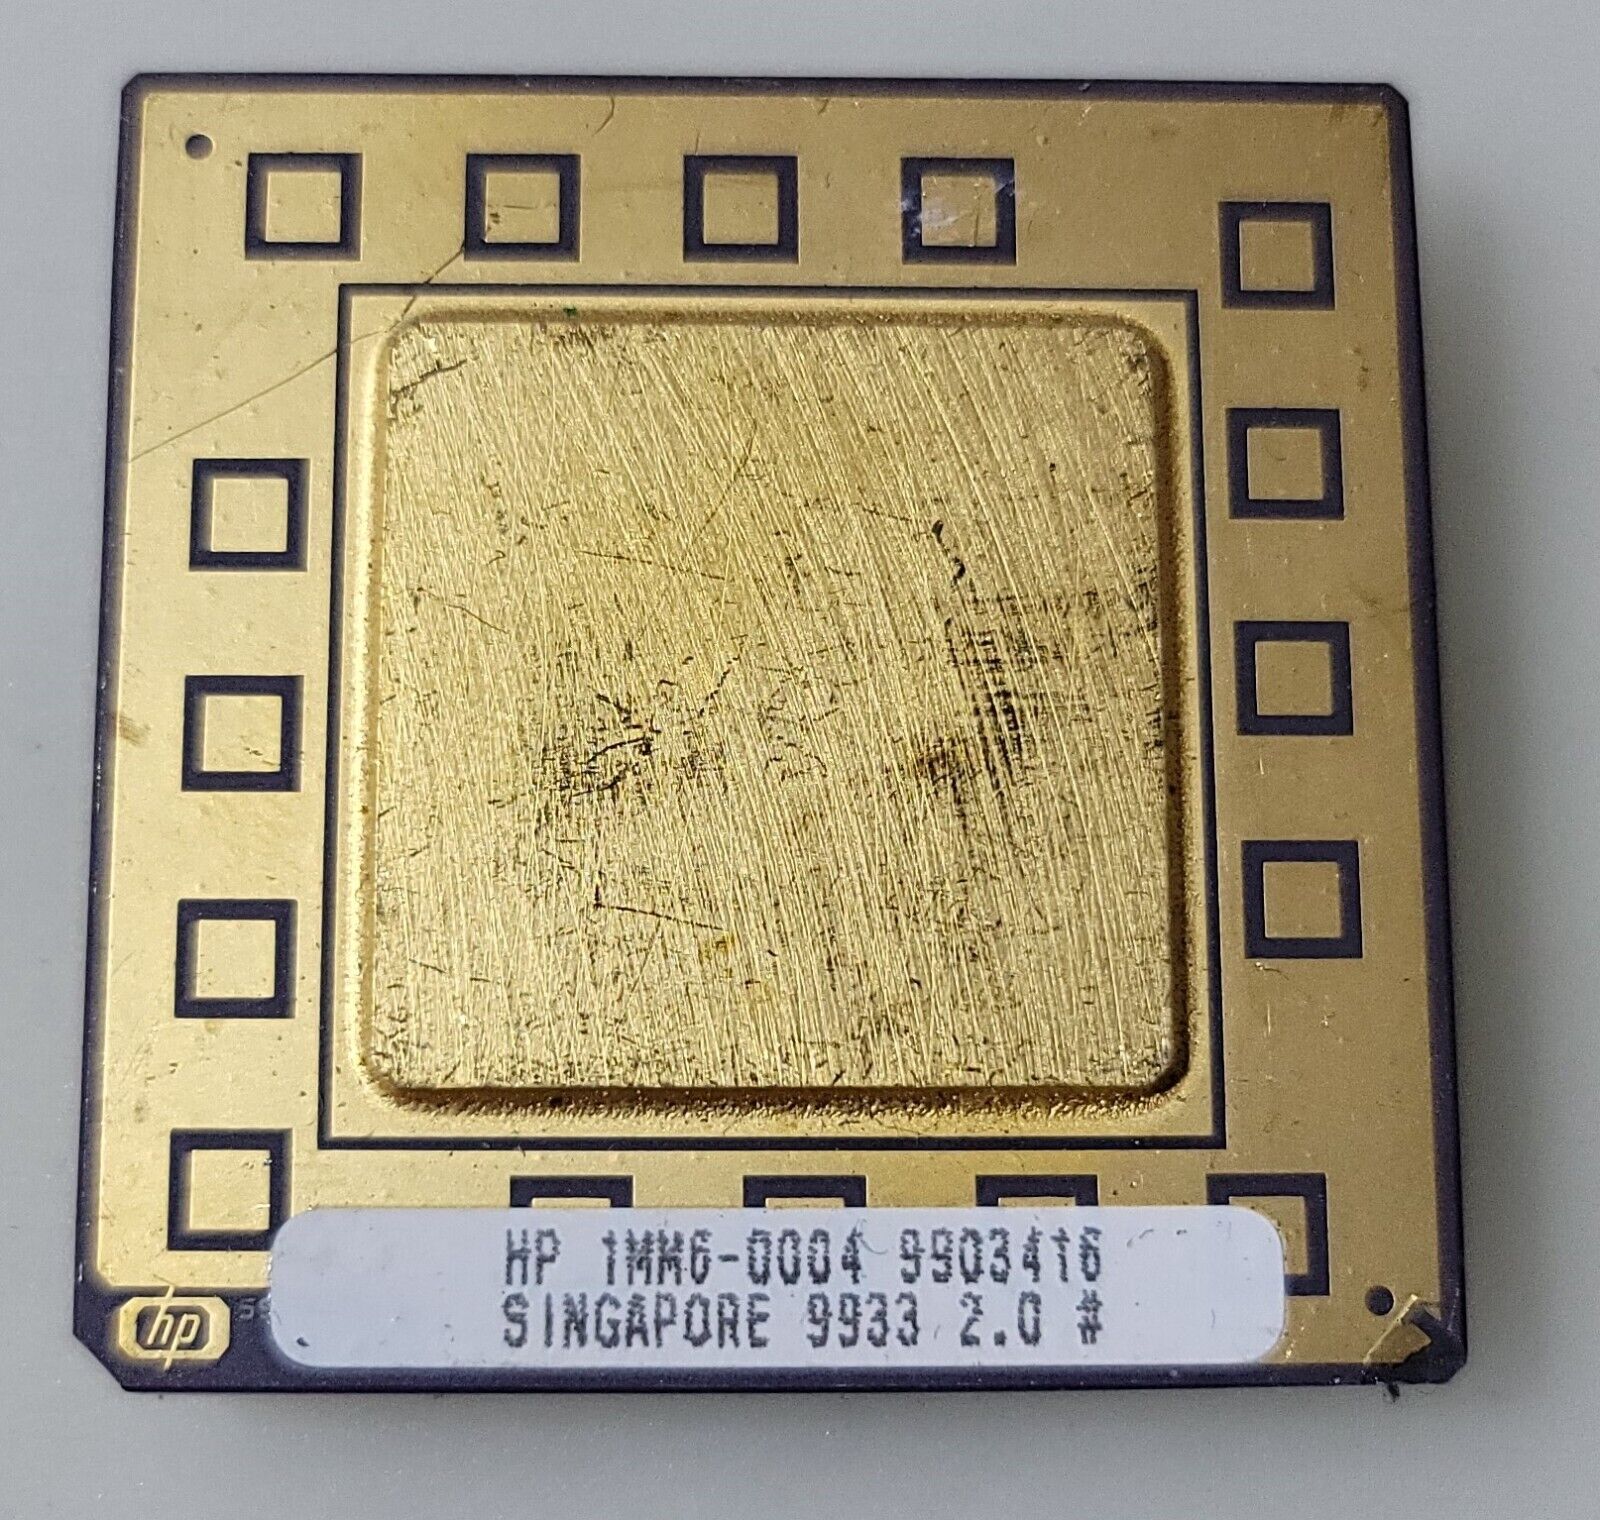 Vintage Rare HP 1MM6-0004 Ceramic Processor For Collection or Gold Recovery